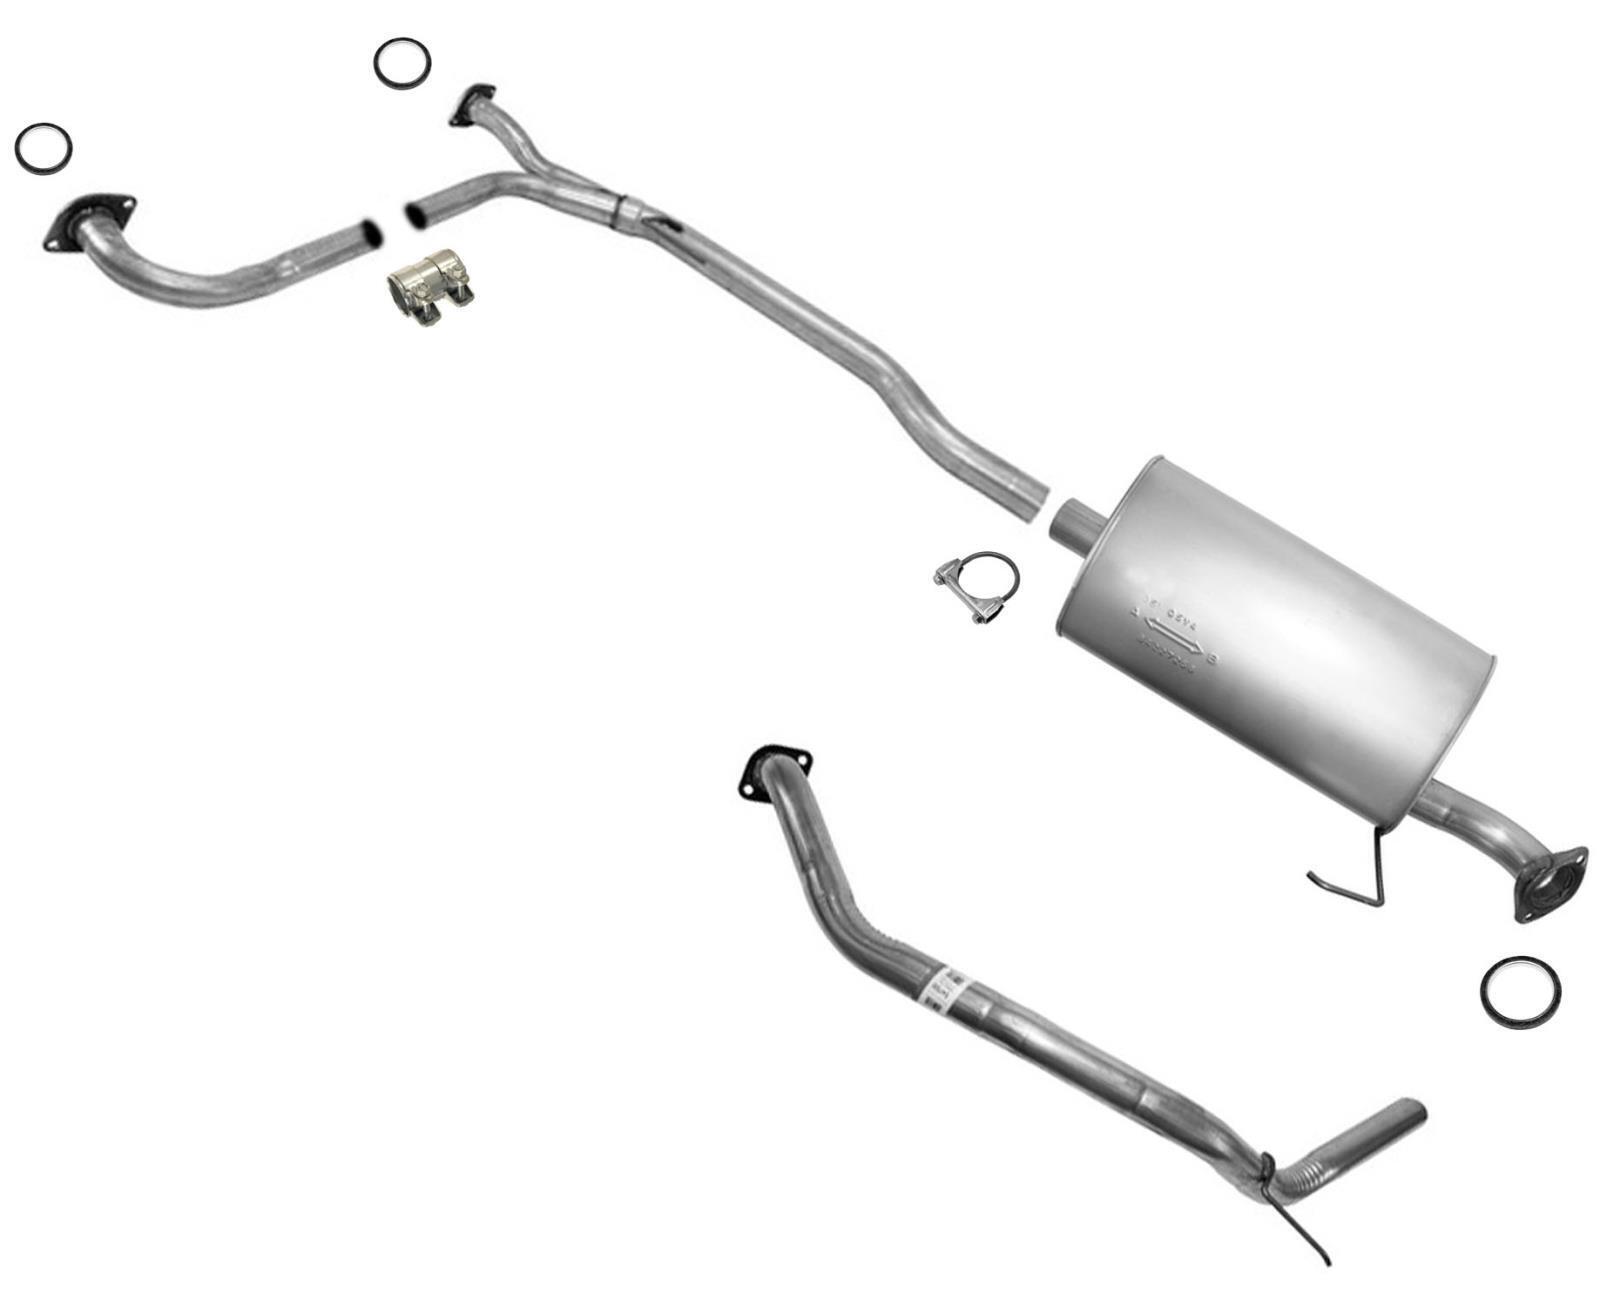 A/P Brand Exhaust System Muffler and Pipes Fits 2004-2006 Nissan Titan 5.6L